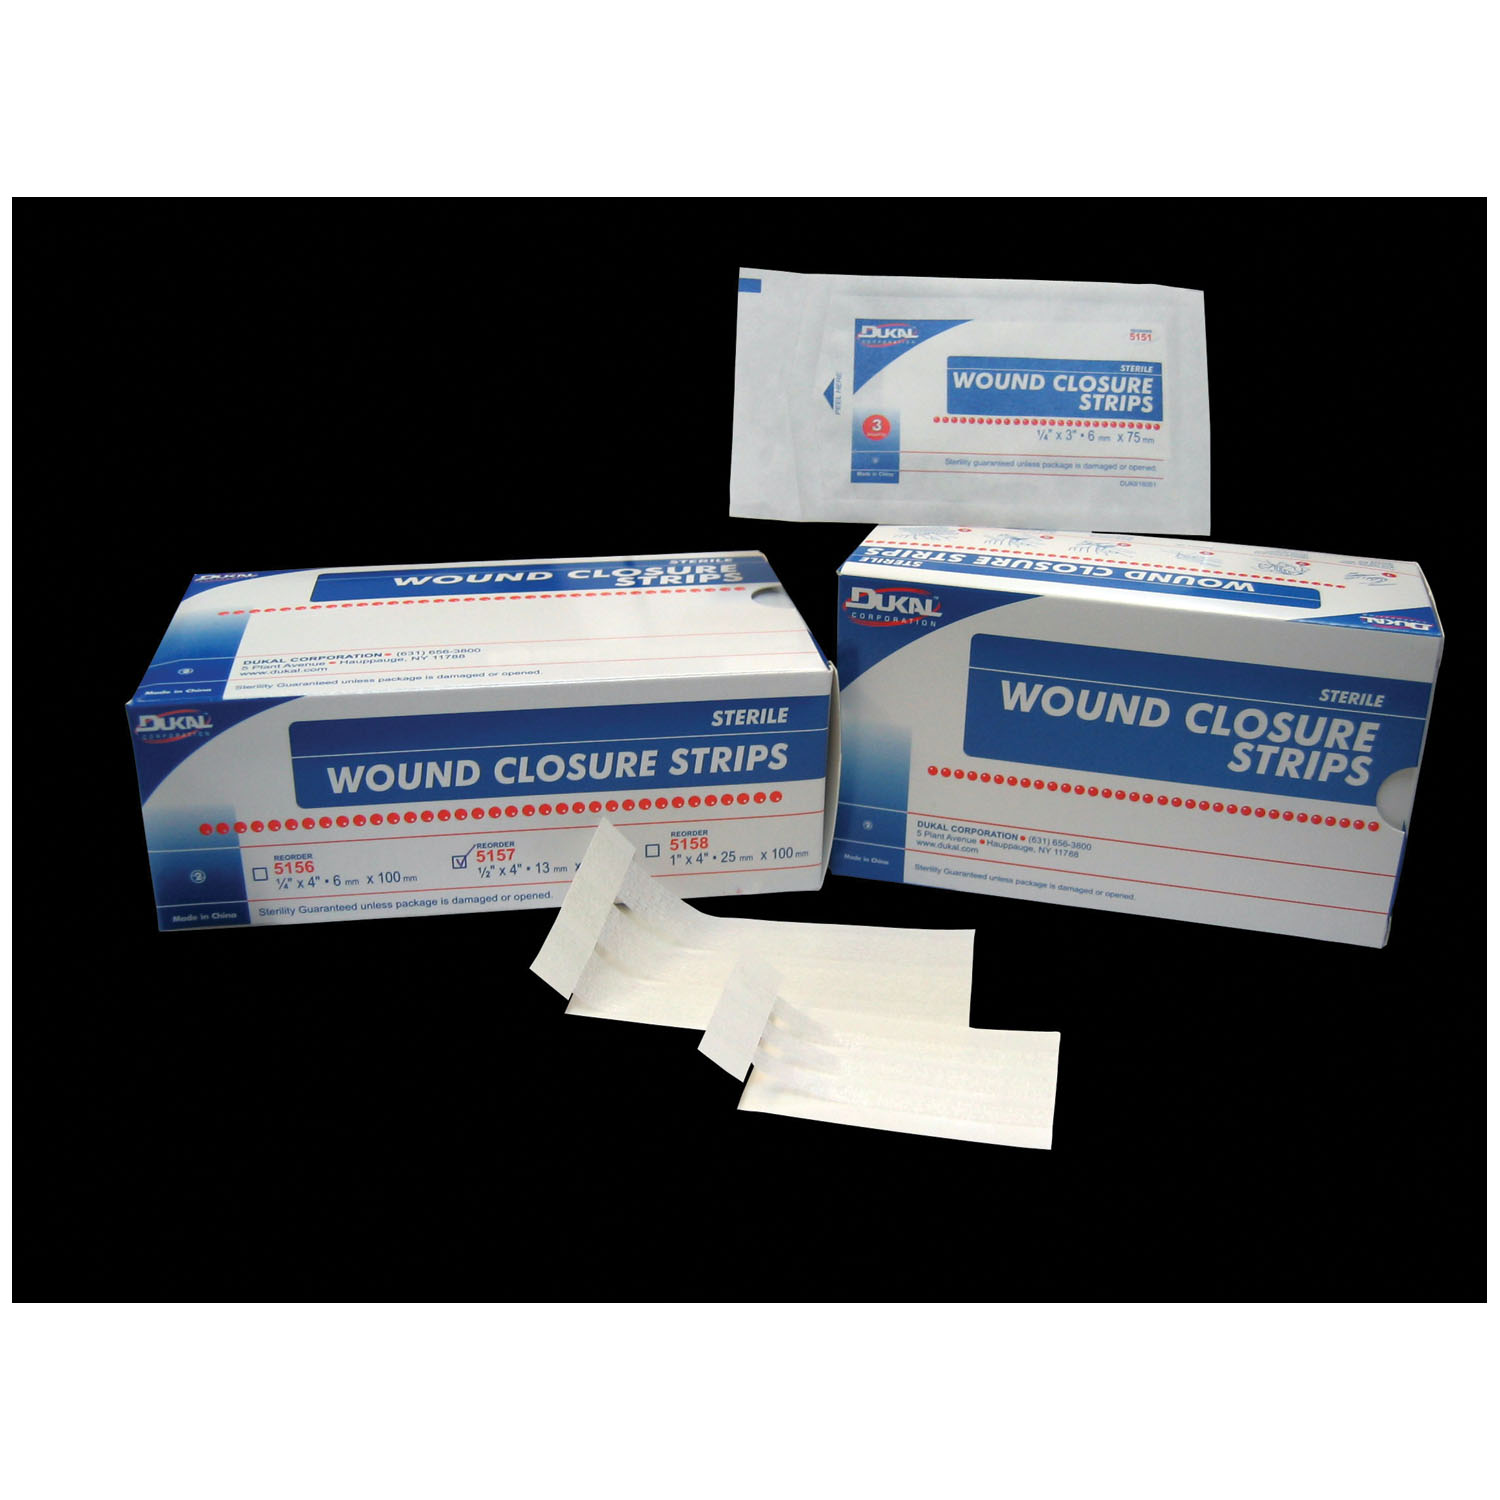 DUKAL WOUND CLOSURE STRIPS : 5158 BX                       $55.12 Stocked